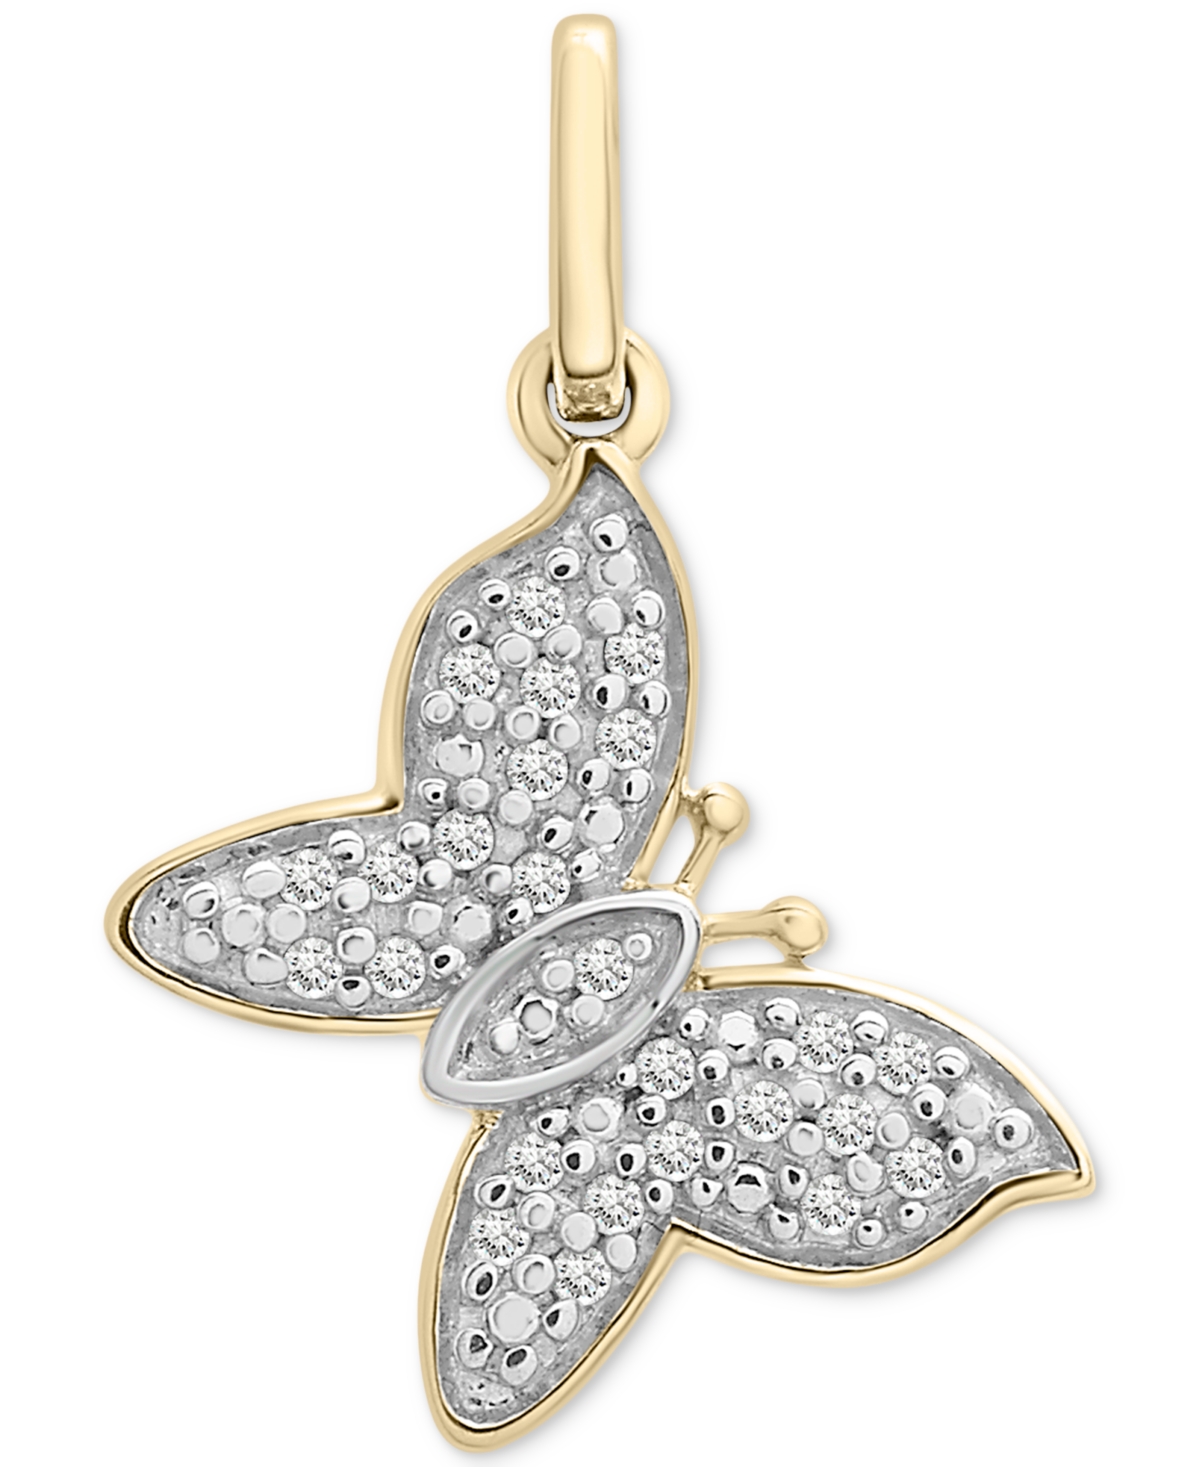 Diamond Butterfly Charm Pendant (1/20 ct. t.w.) in 10k Gold, Created for Macy's - Yellow Gold